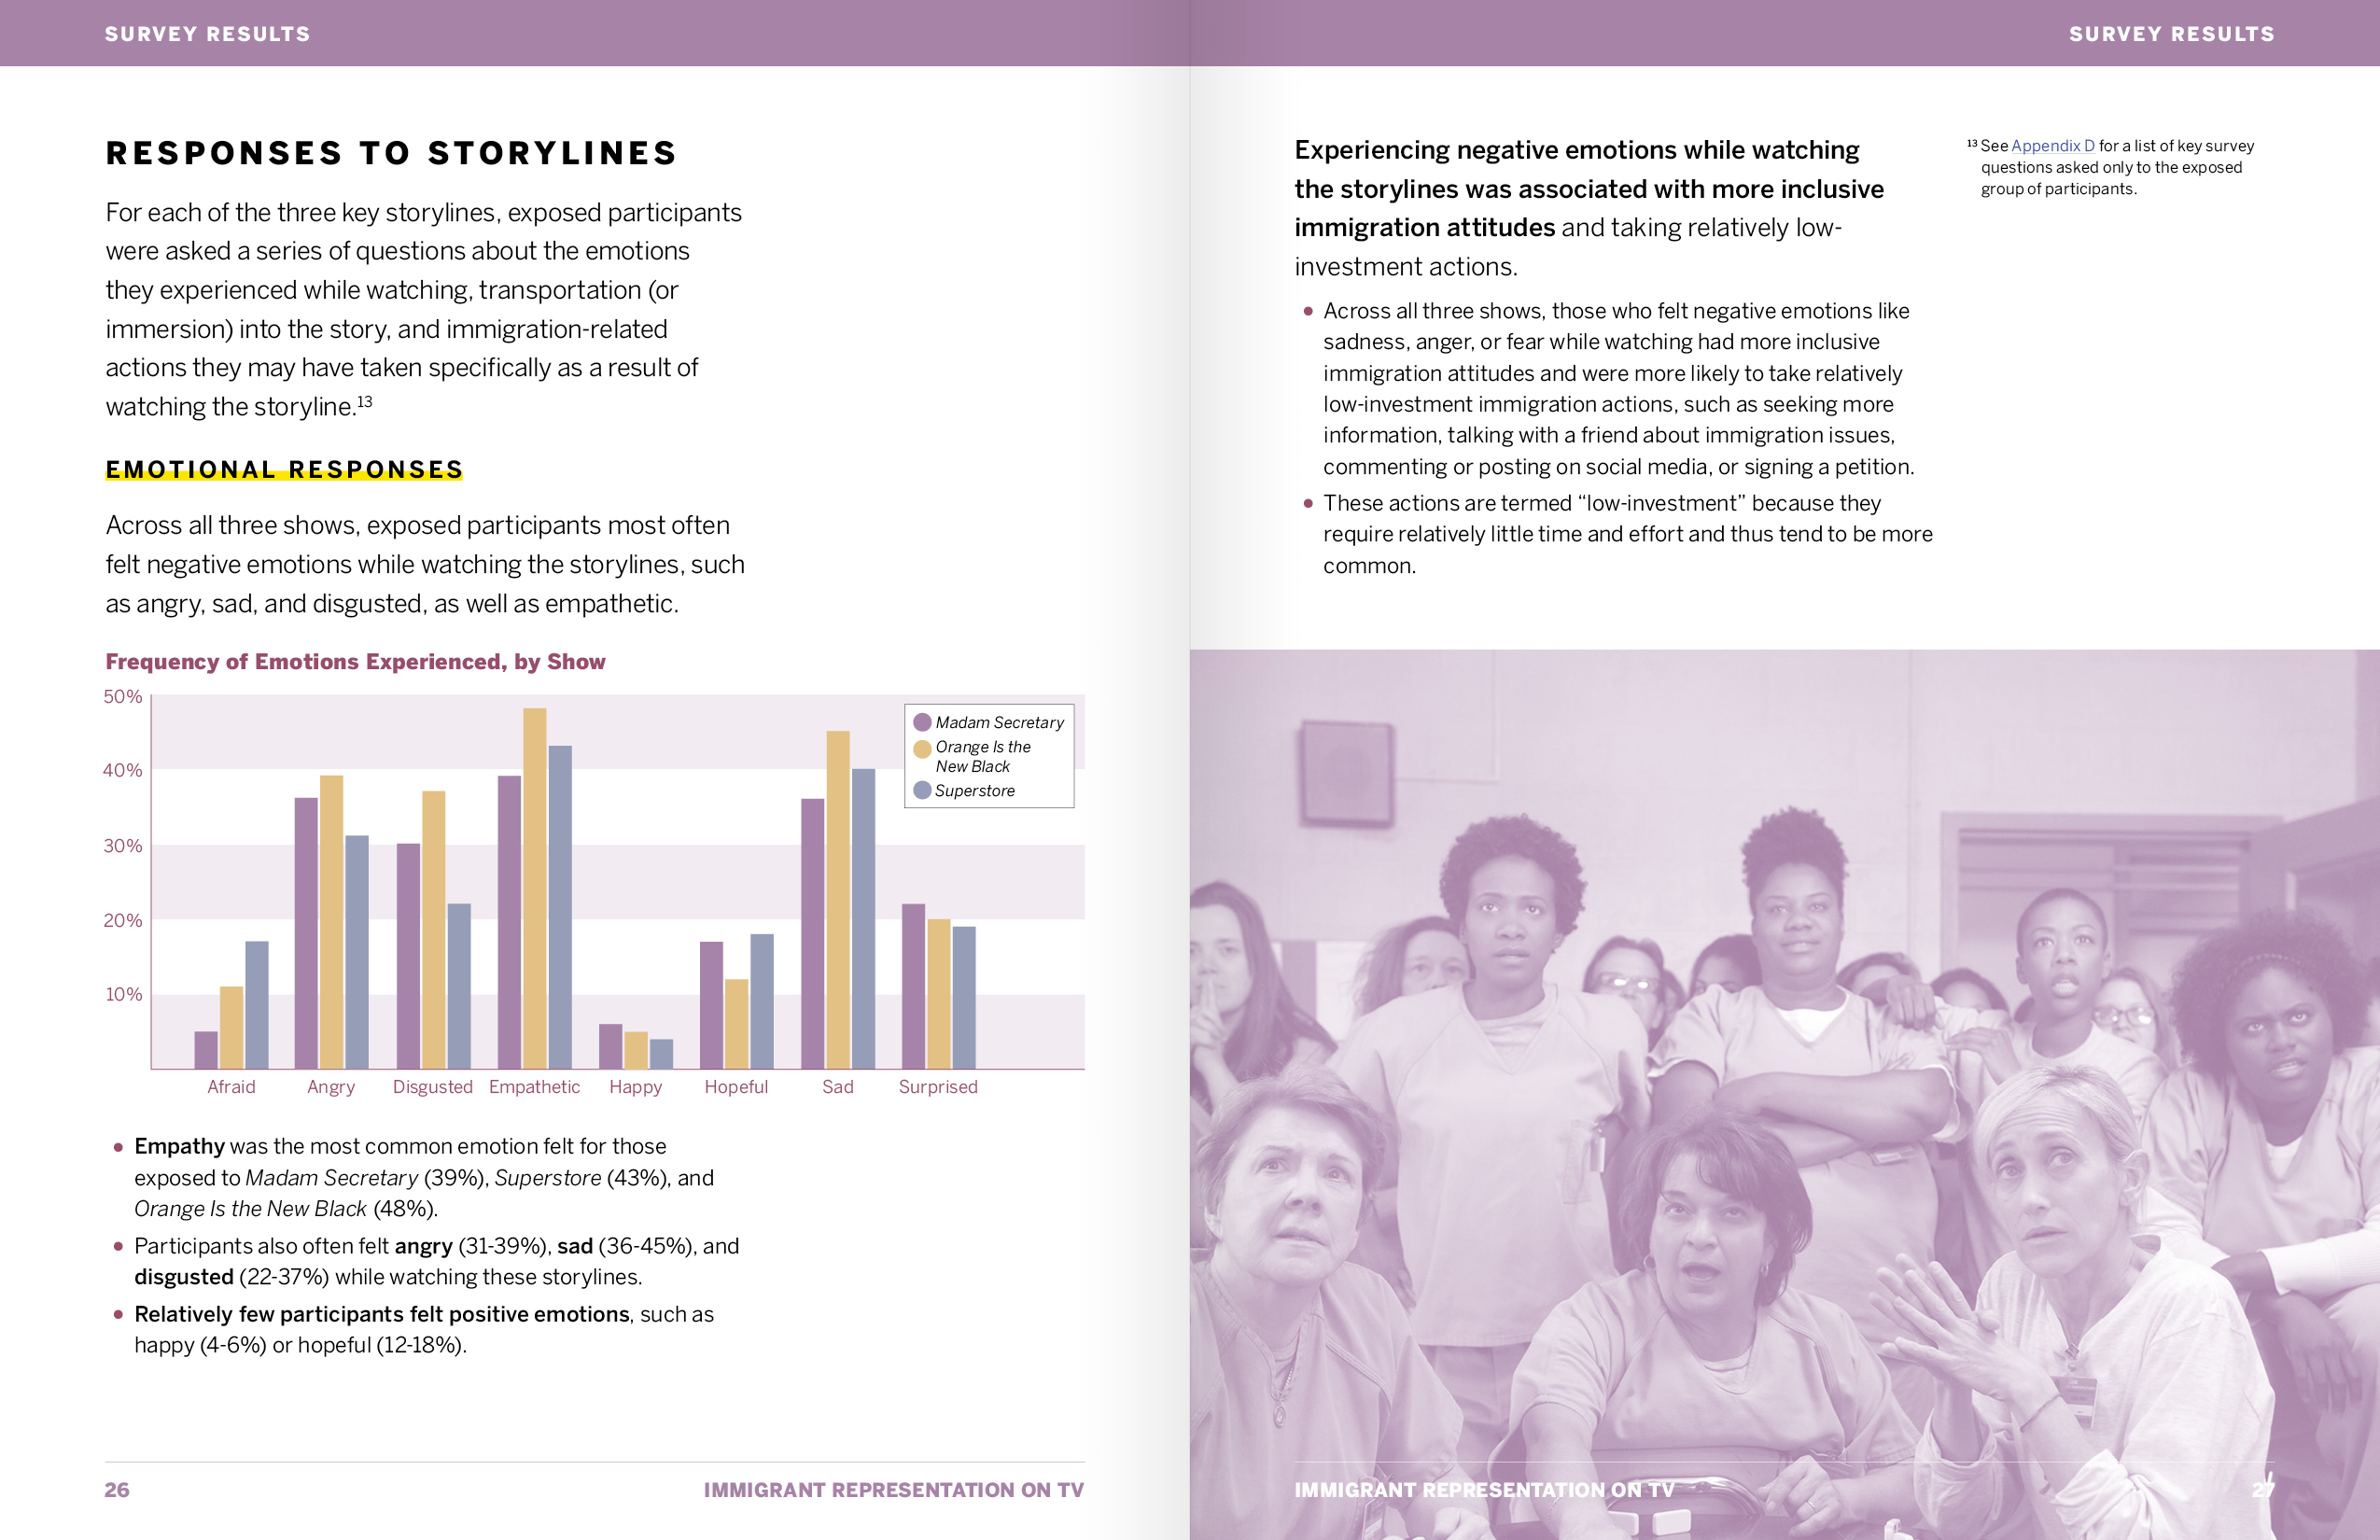 Spread from the report with a graph showing emotional responses to storylines in the shows studied. In the bottom right is a photo of a mostly Black crowd of women in prison from the show Orange is the New Black, looking up above the camera.